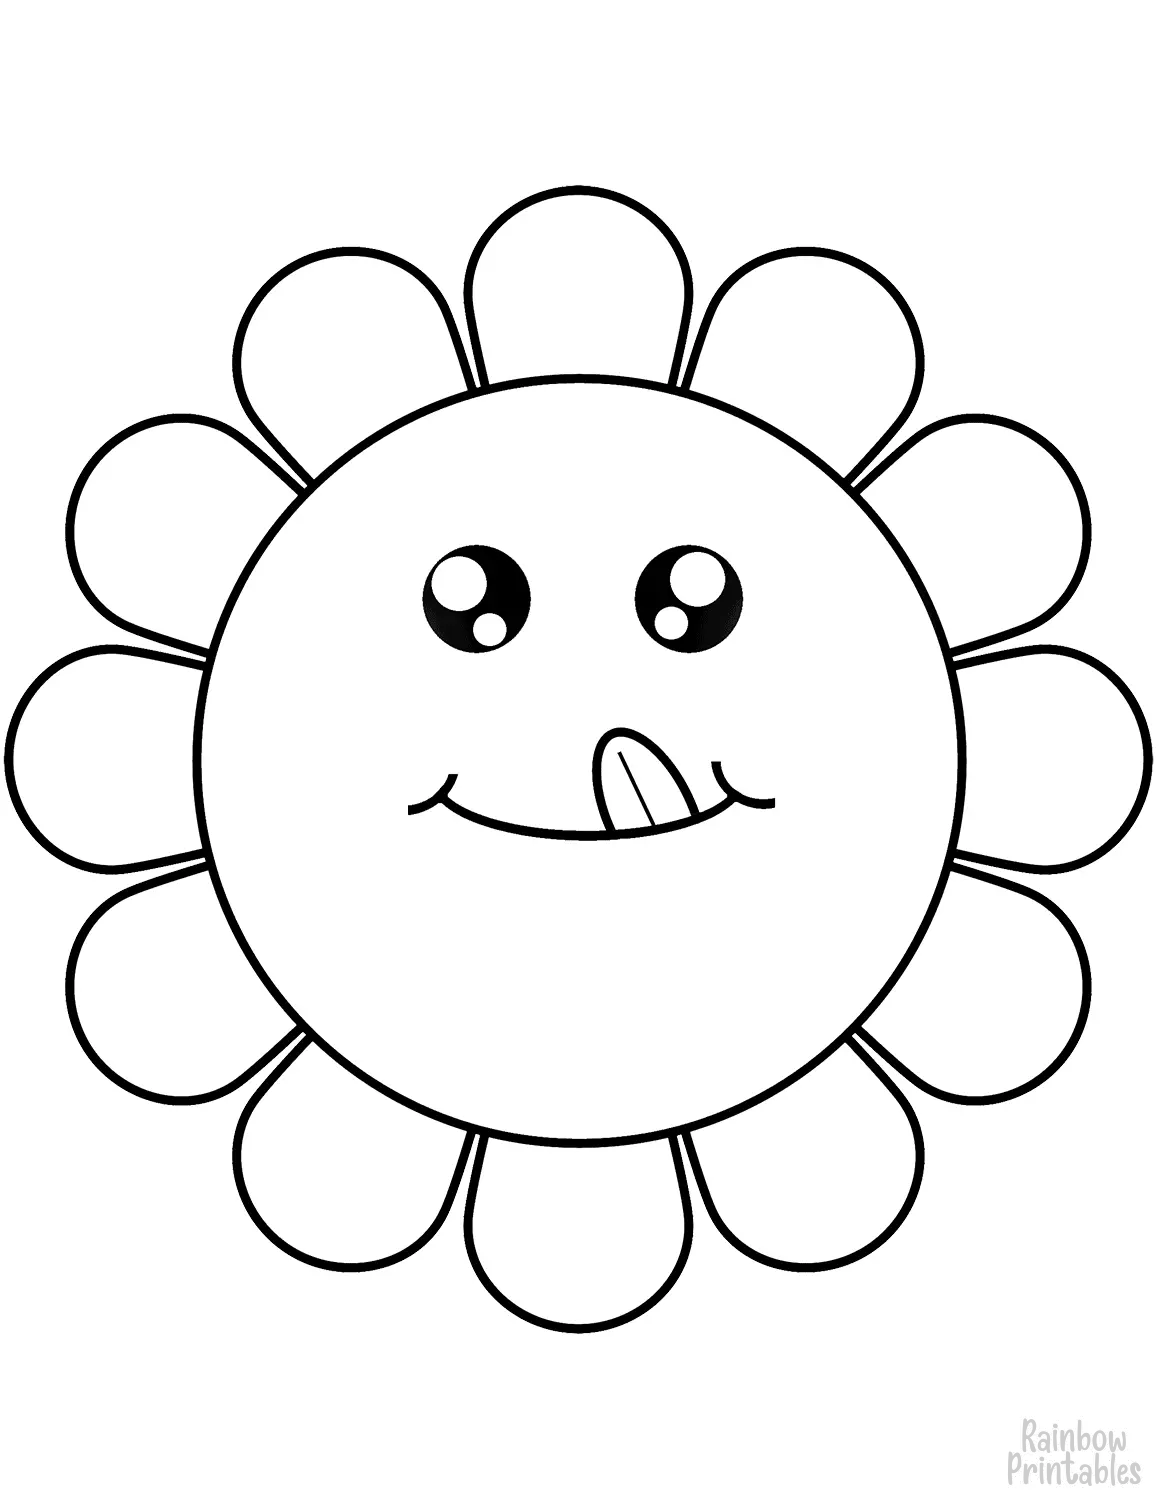 SIMPLE-EASY-line-drawings-CARTOON-Flower-Face-coloring-page-for-kids Outline